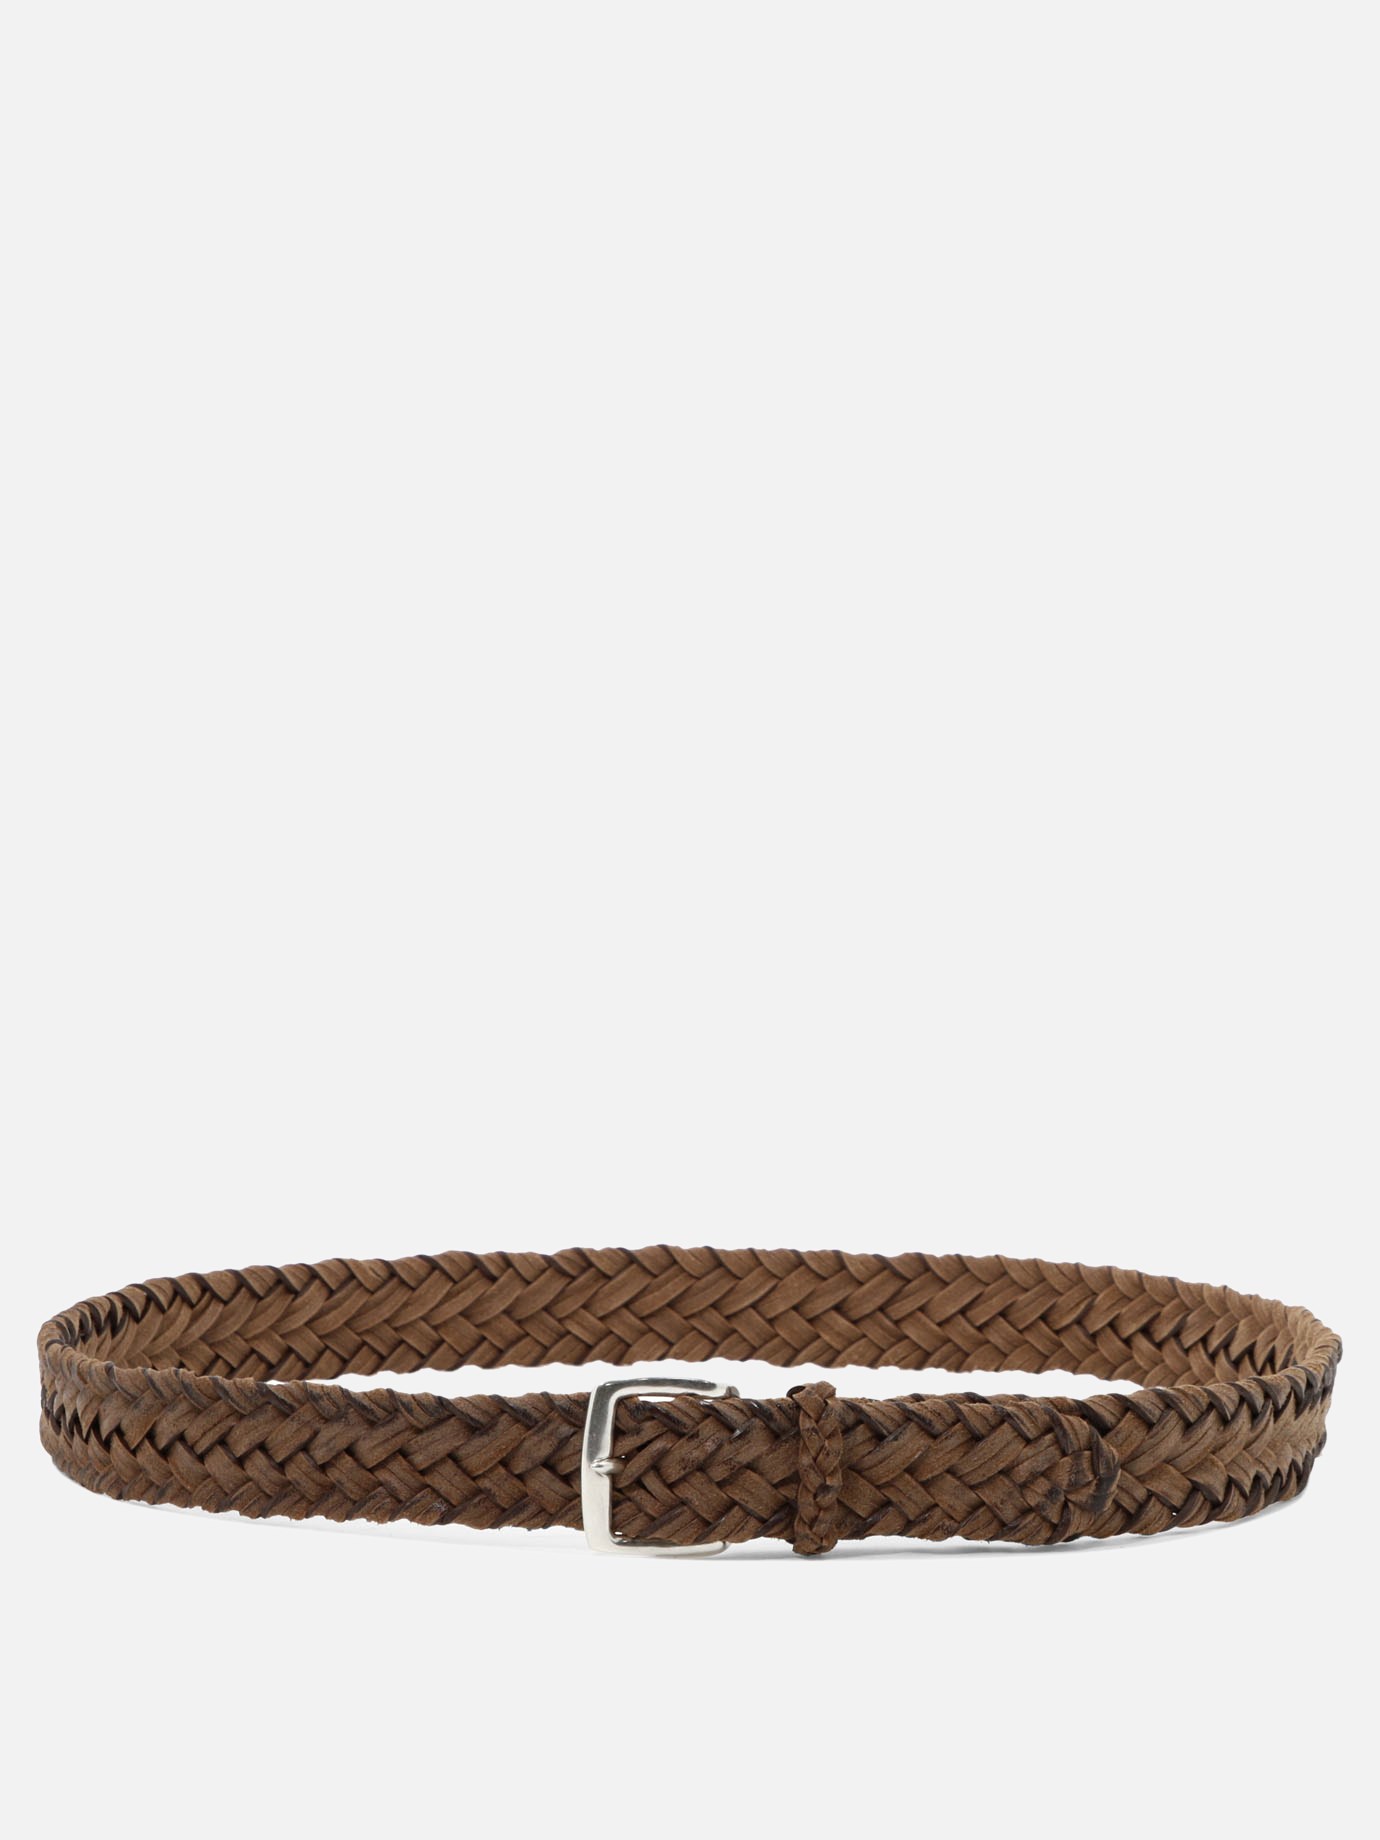 Woven leather beltby Orciani - 2